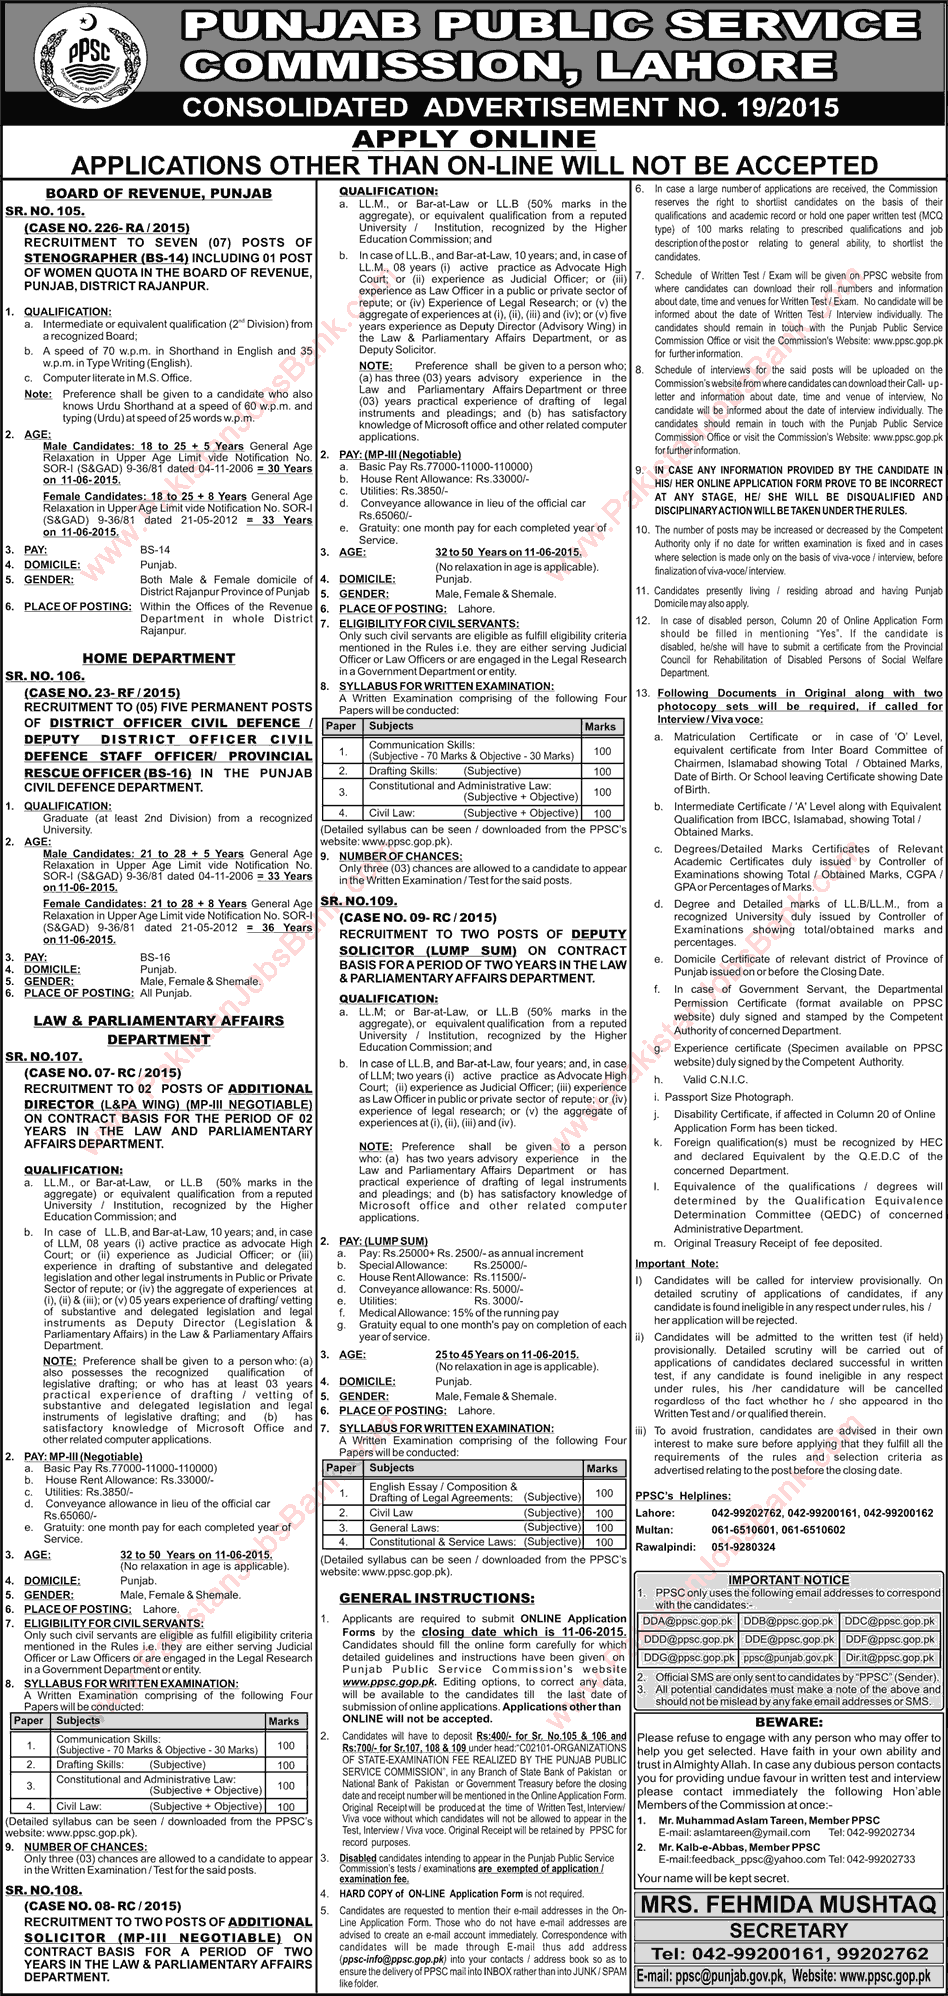 Punjab Public Service Commission Jobs May 2015 Consolidated Advertisement No 19/2015 Latest